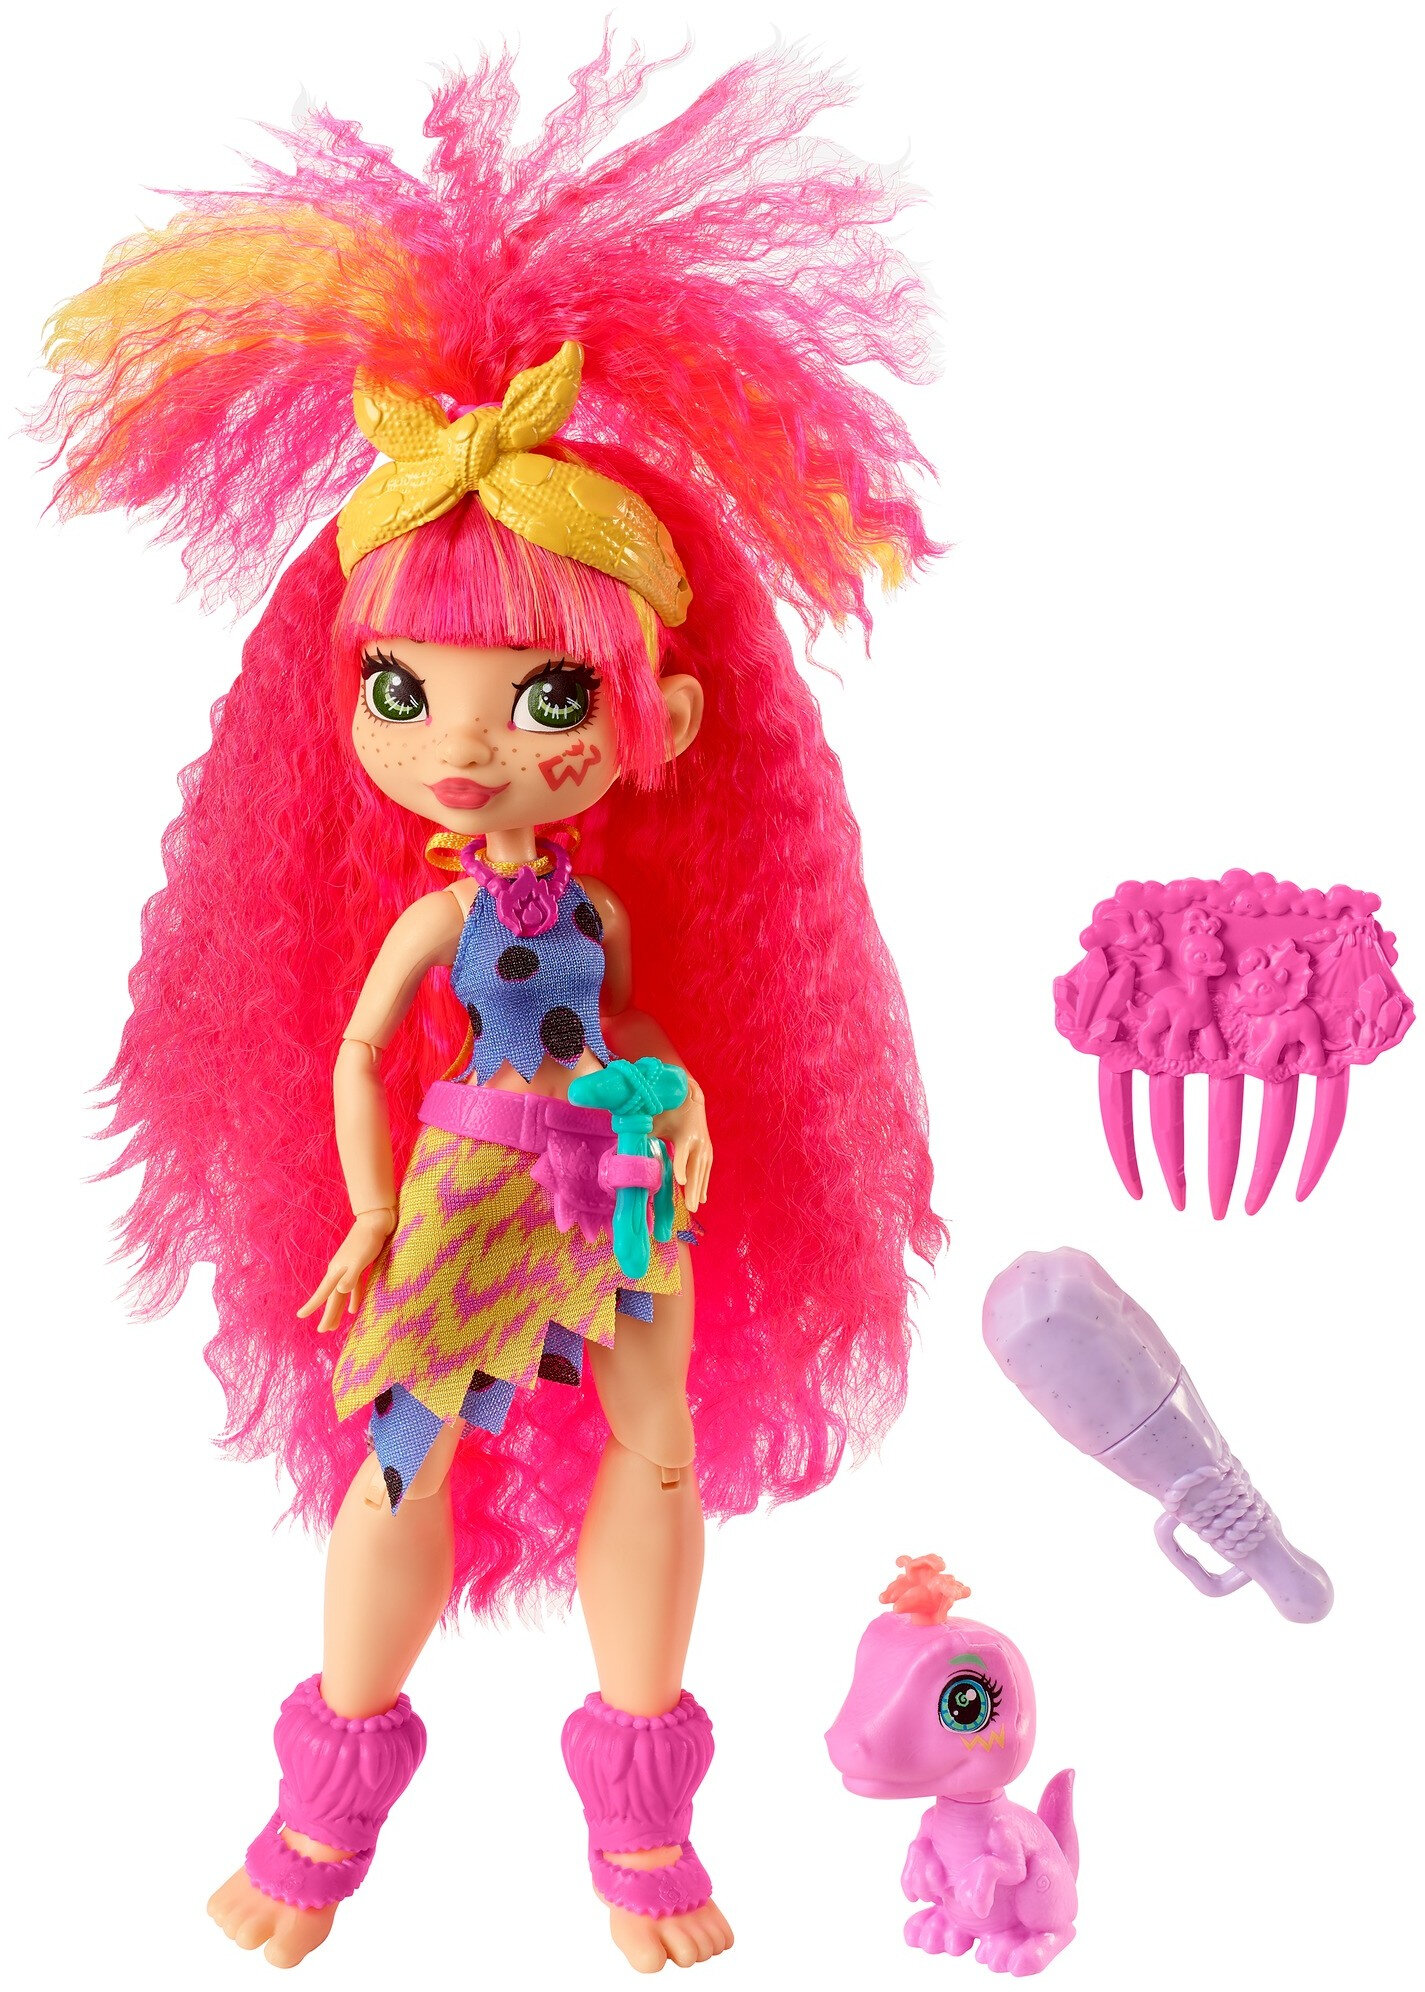 Cave Club Emberly Doll (8 - 10-Inch) Prehistoric Fashion Doll with Dinosaur Pet - image 6 of 7